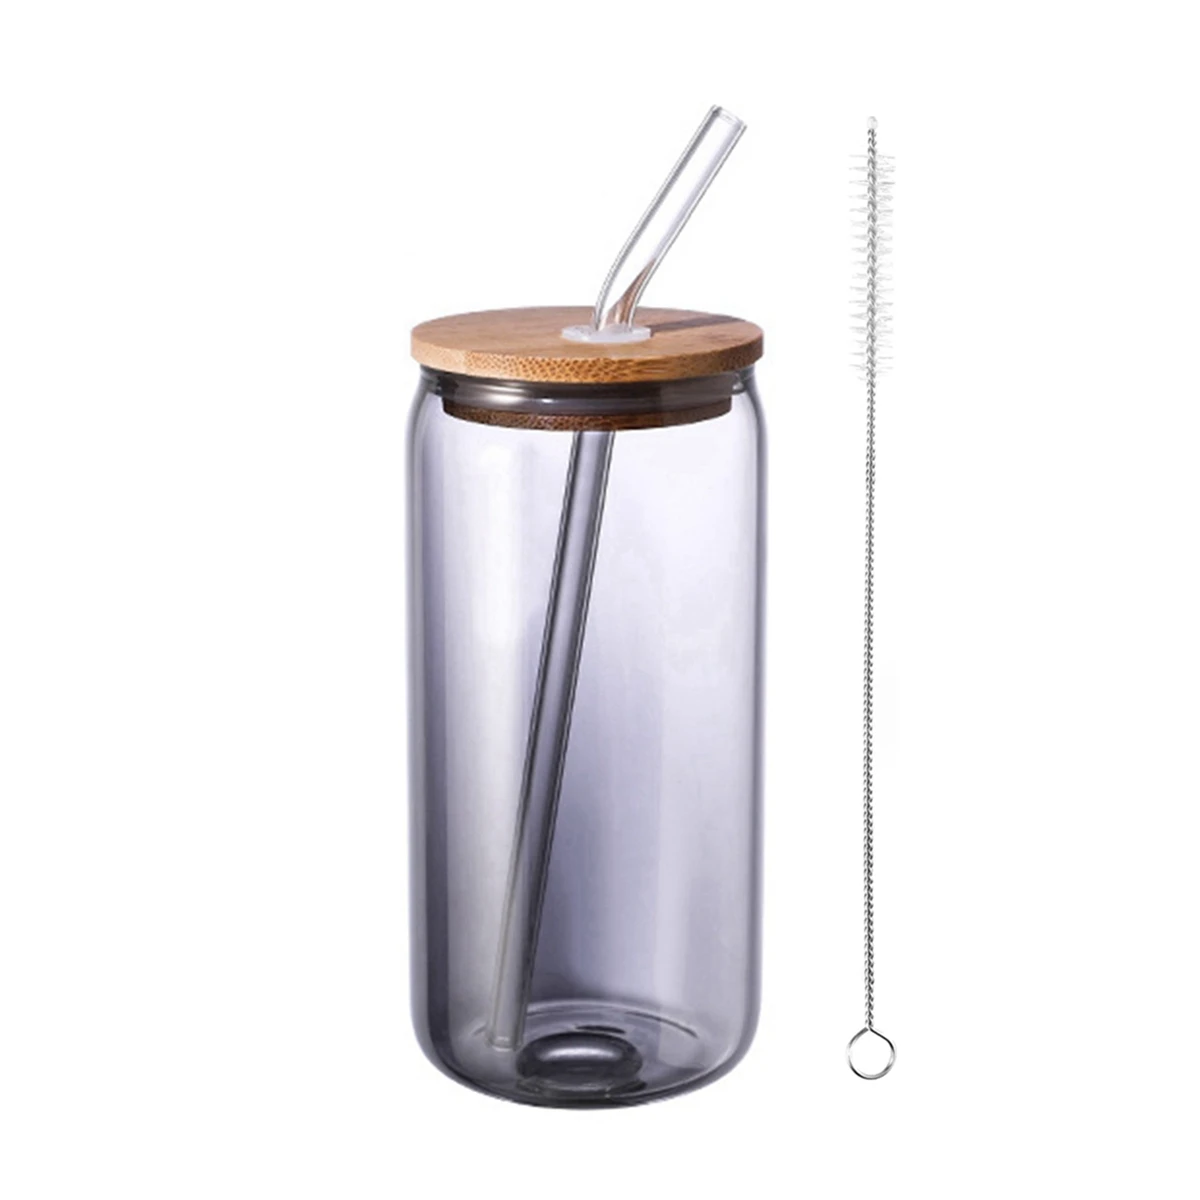 https://ae01.alicdn.com/kf/S066bf6f05f67436ea95a6bcca0ac146fZ/500ml-380ml-Glass-Cup-With-Bamboo-Lid-and-Glass-Straw-Juice-Glass-Beer-Can-Milk-Coffee.jpg